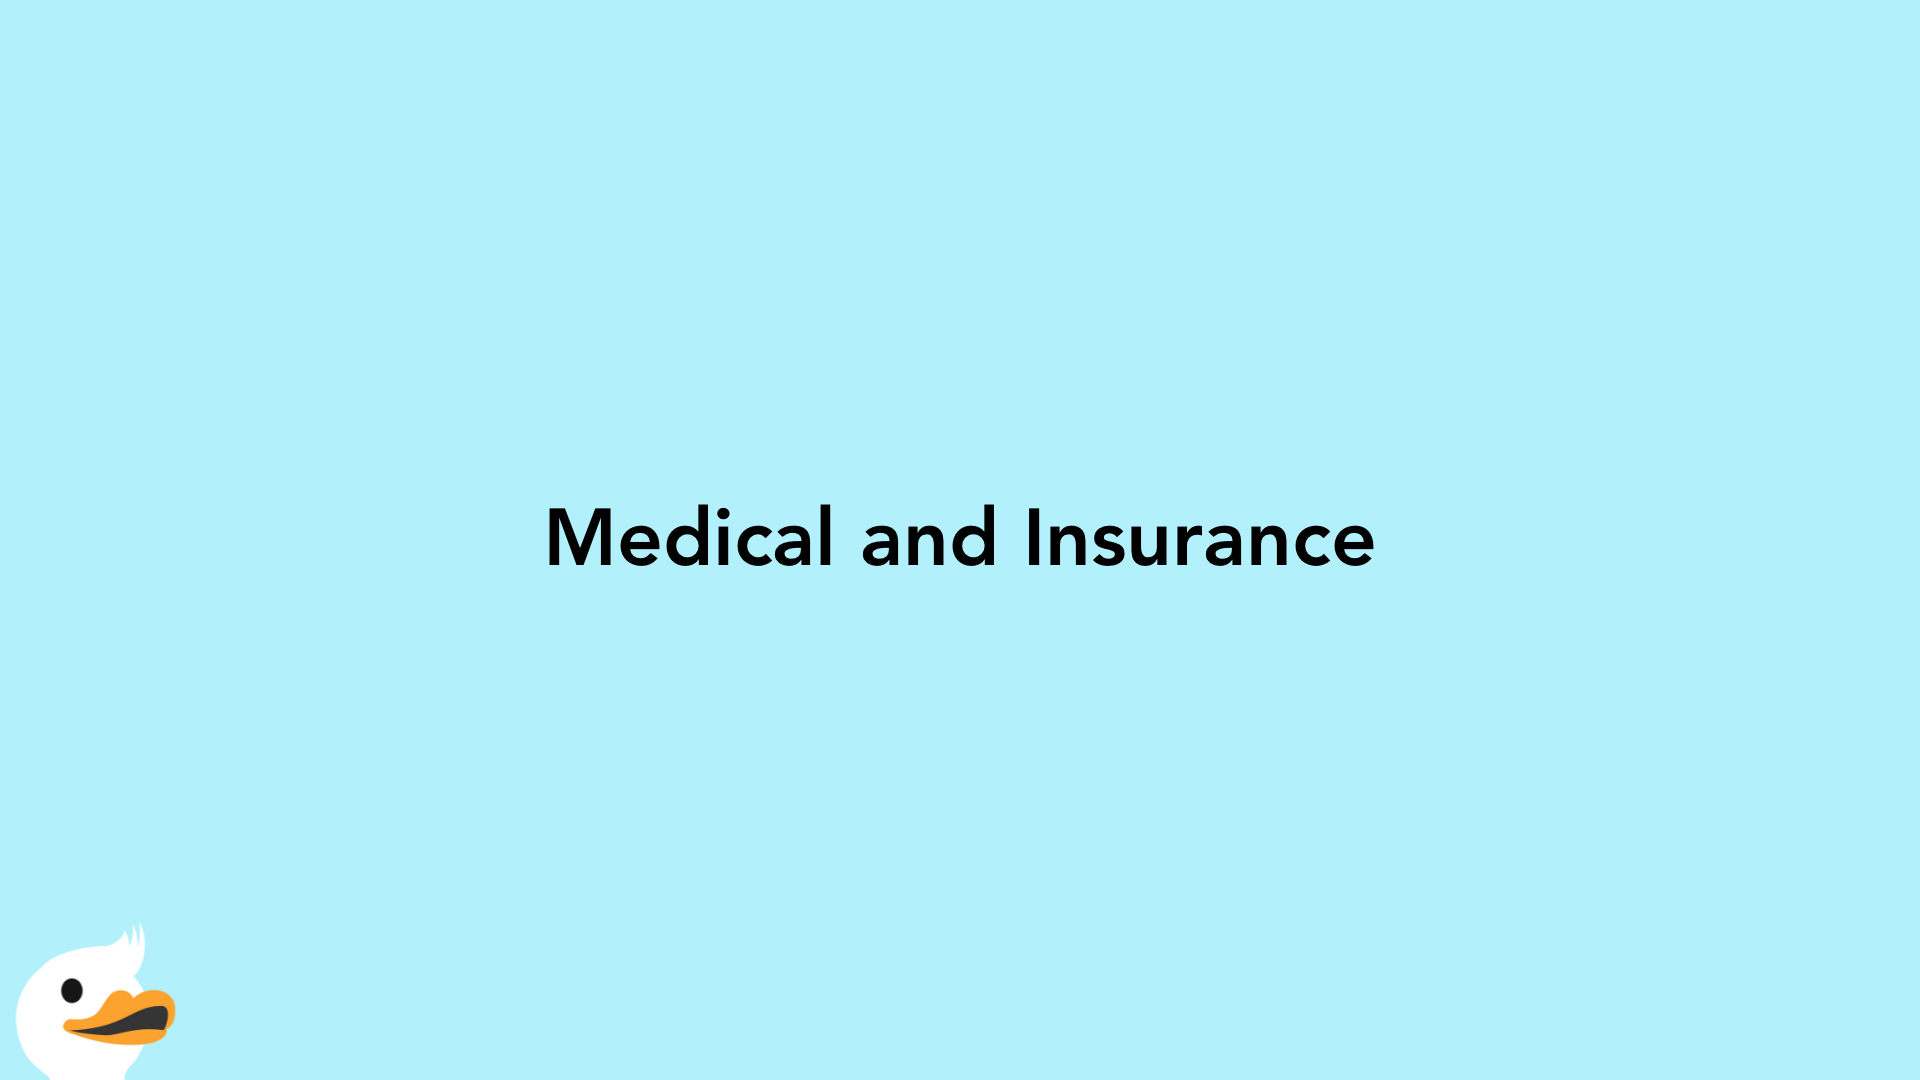 Medical and Insurance